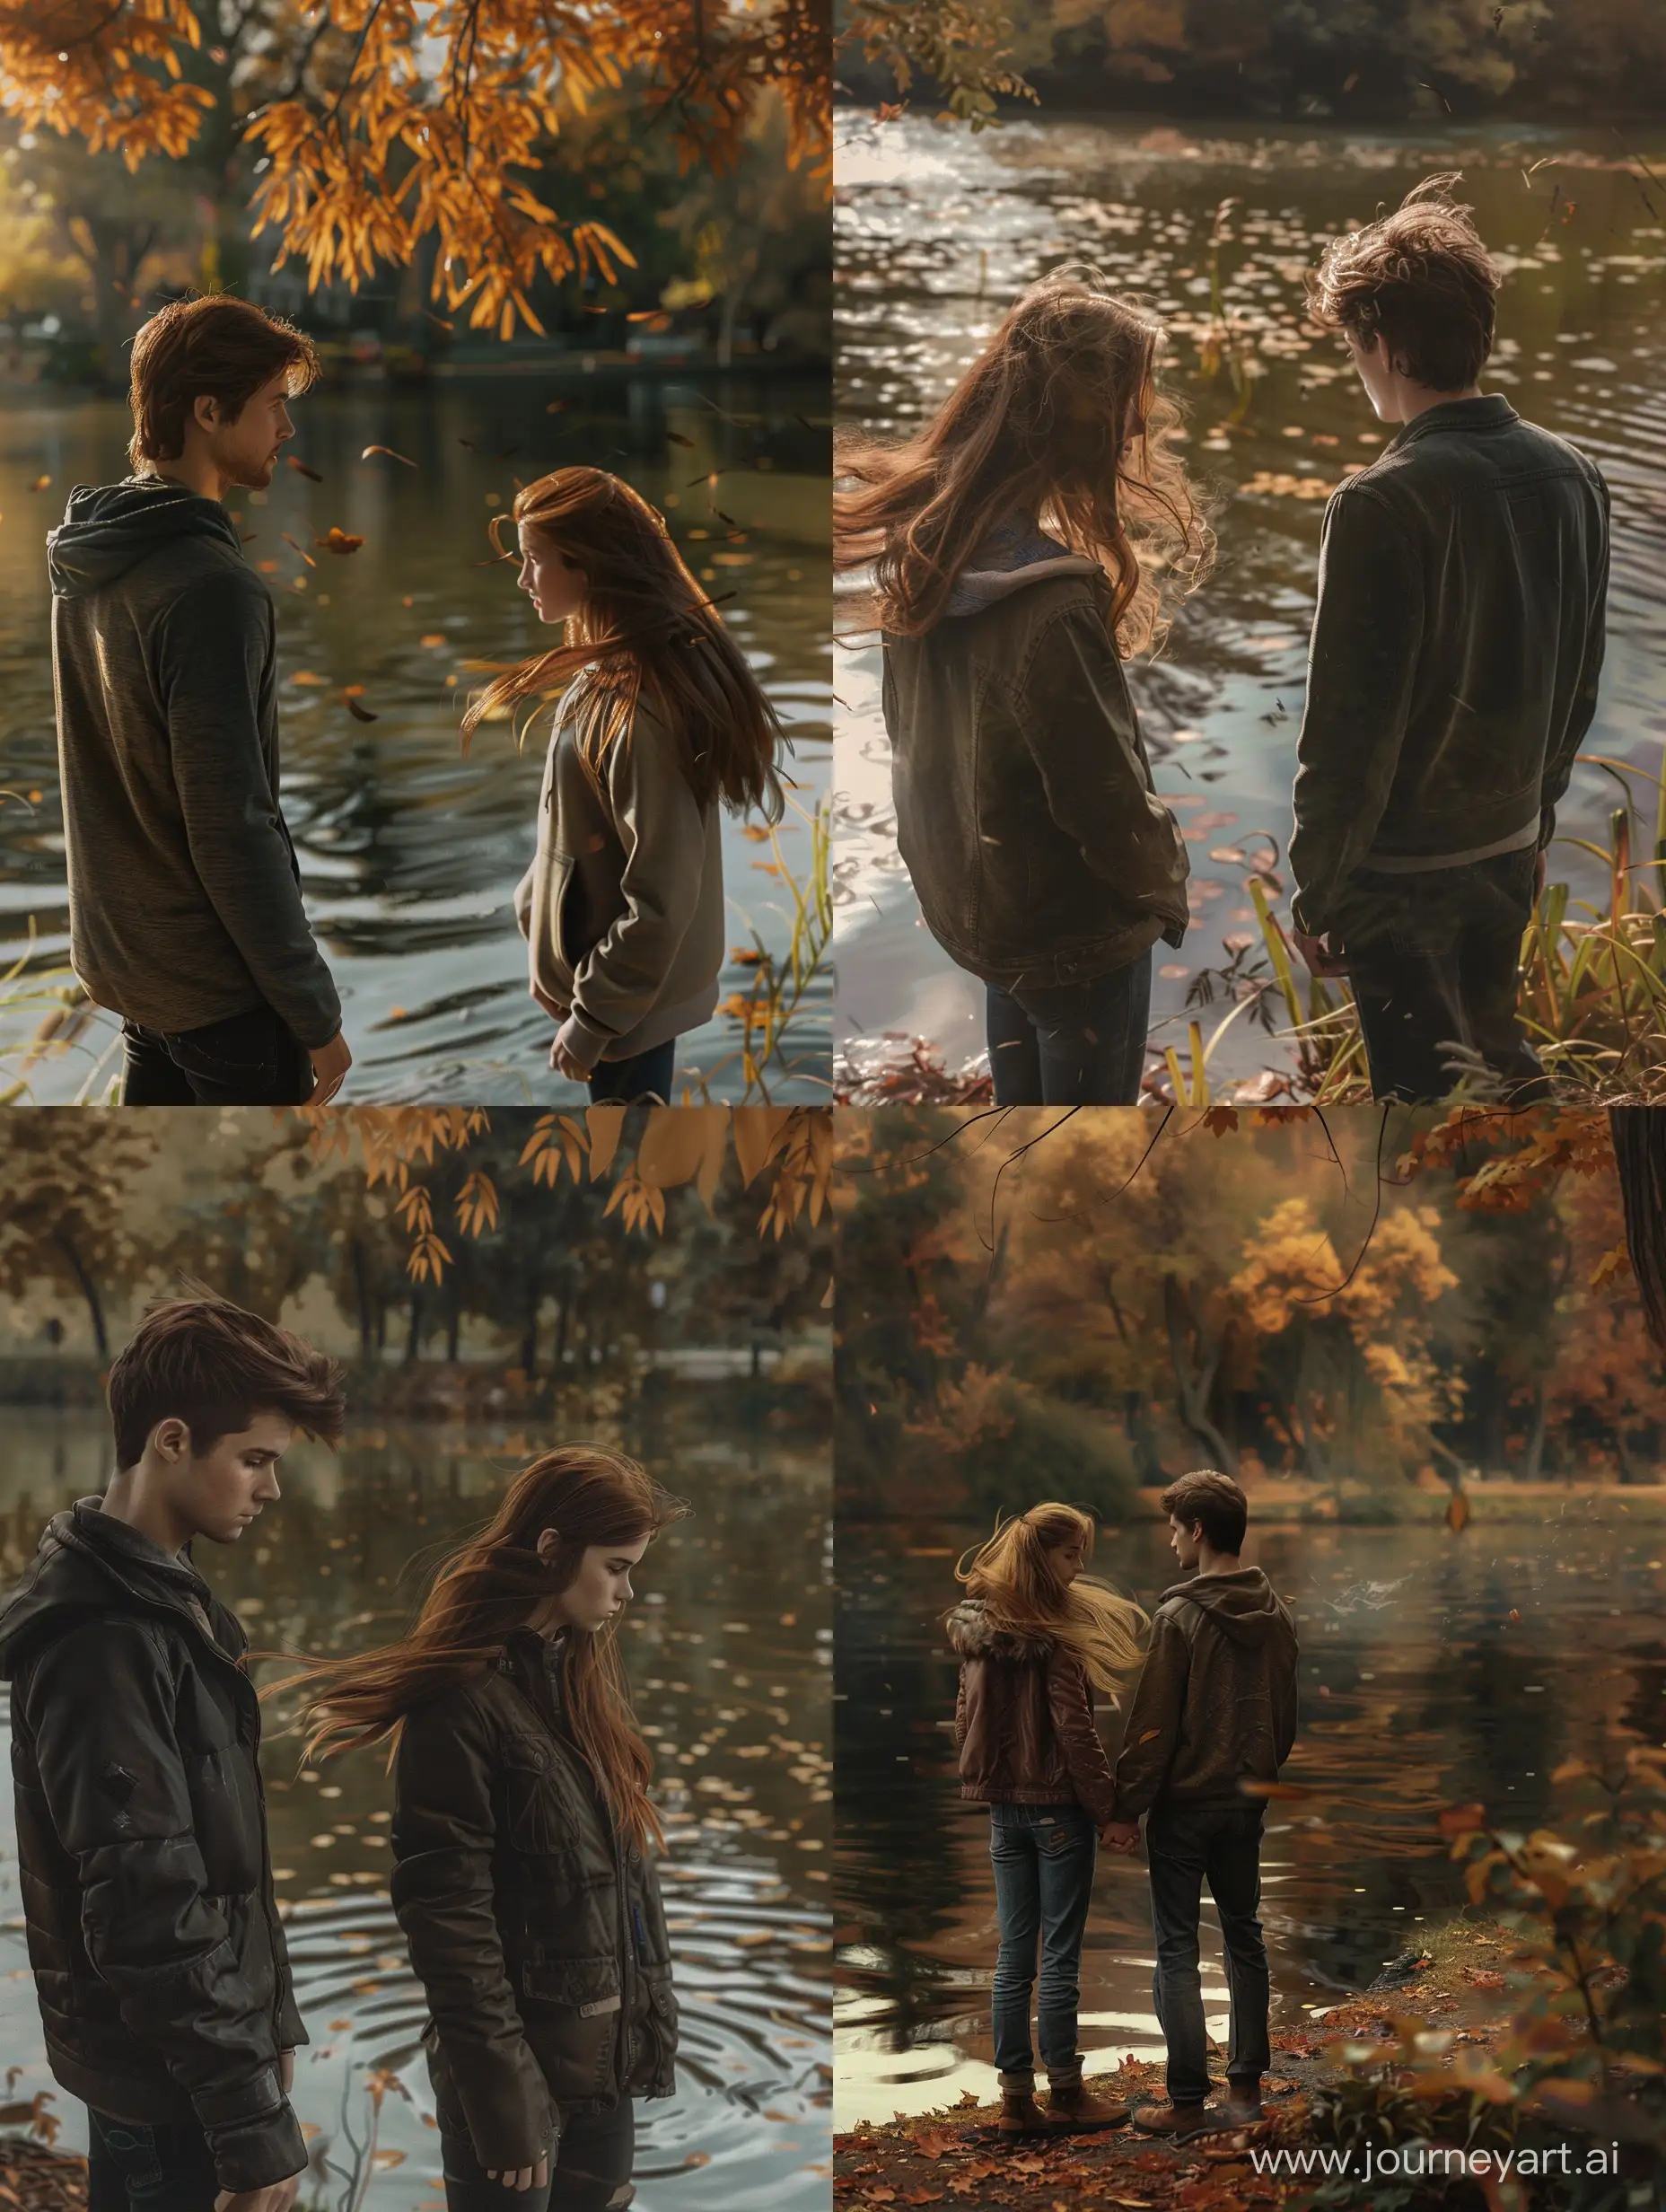 Late-Autumn-Park-Scene-Couple-Admiring-Pond-with-Tousled-Hair